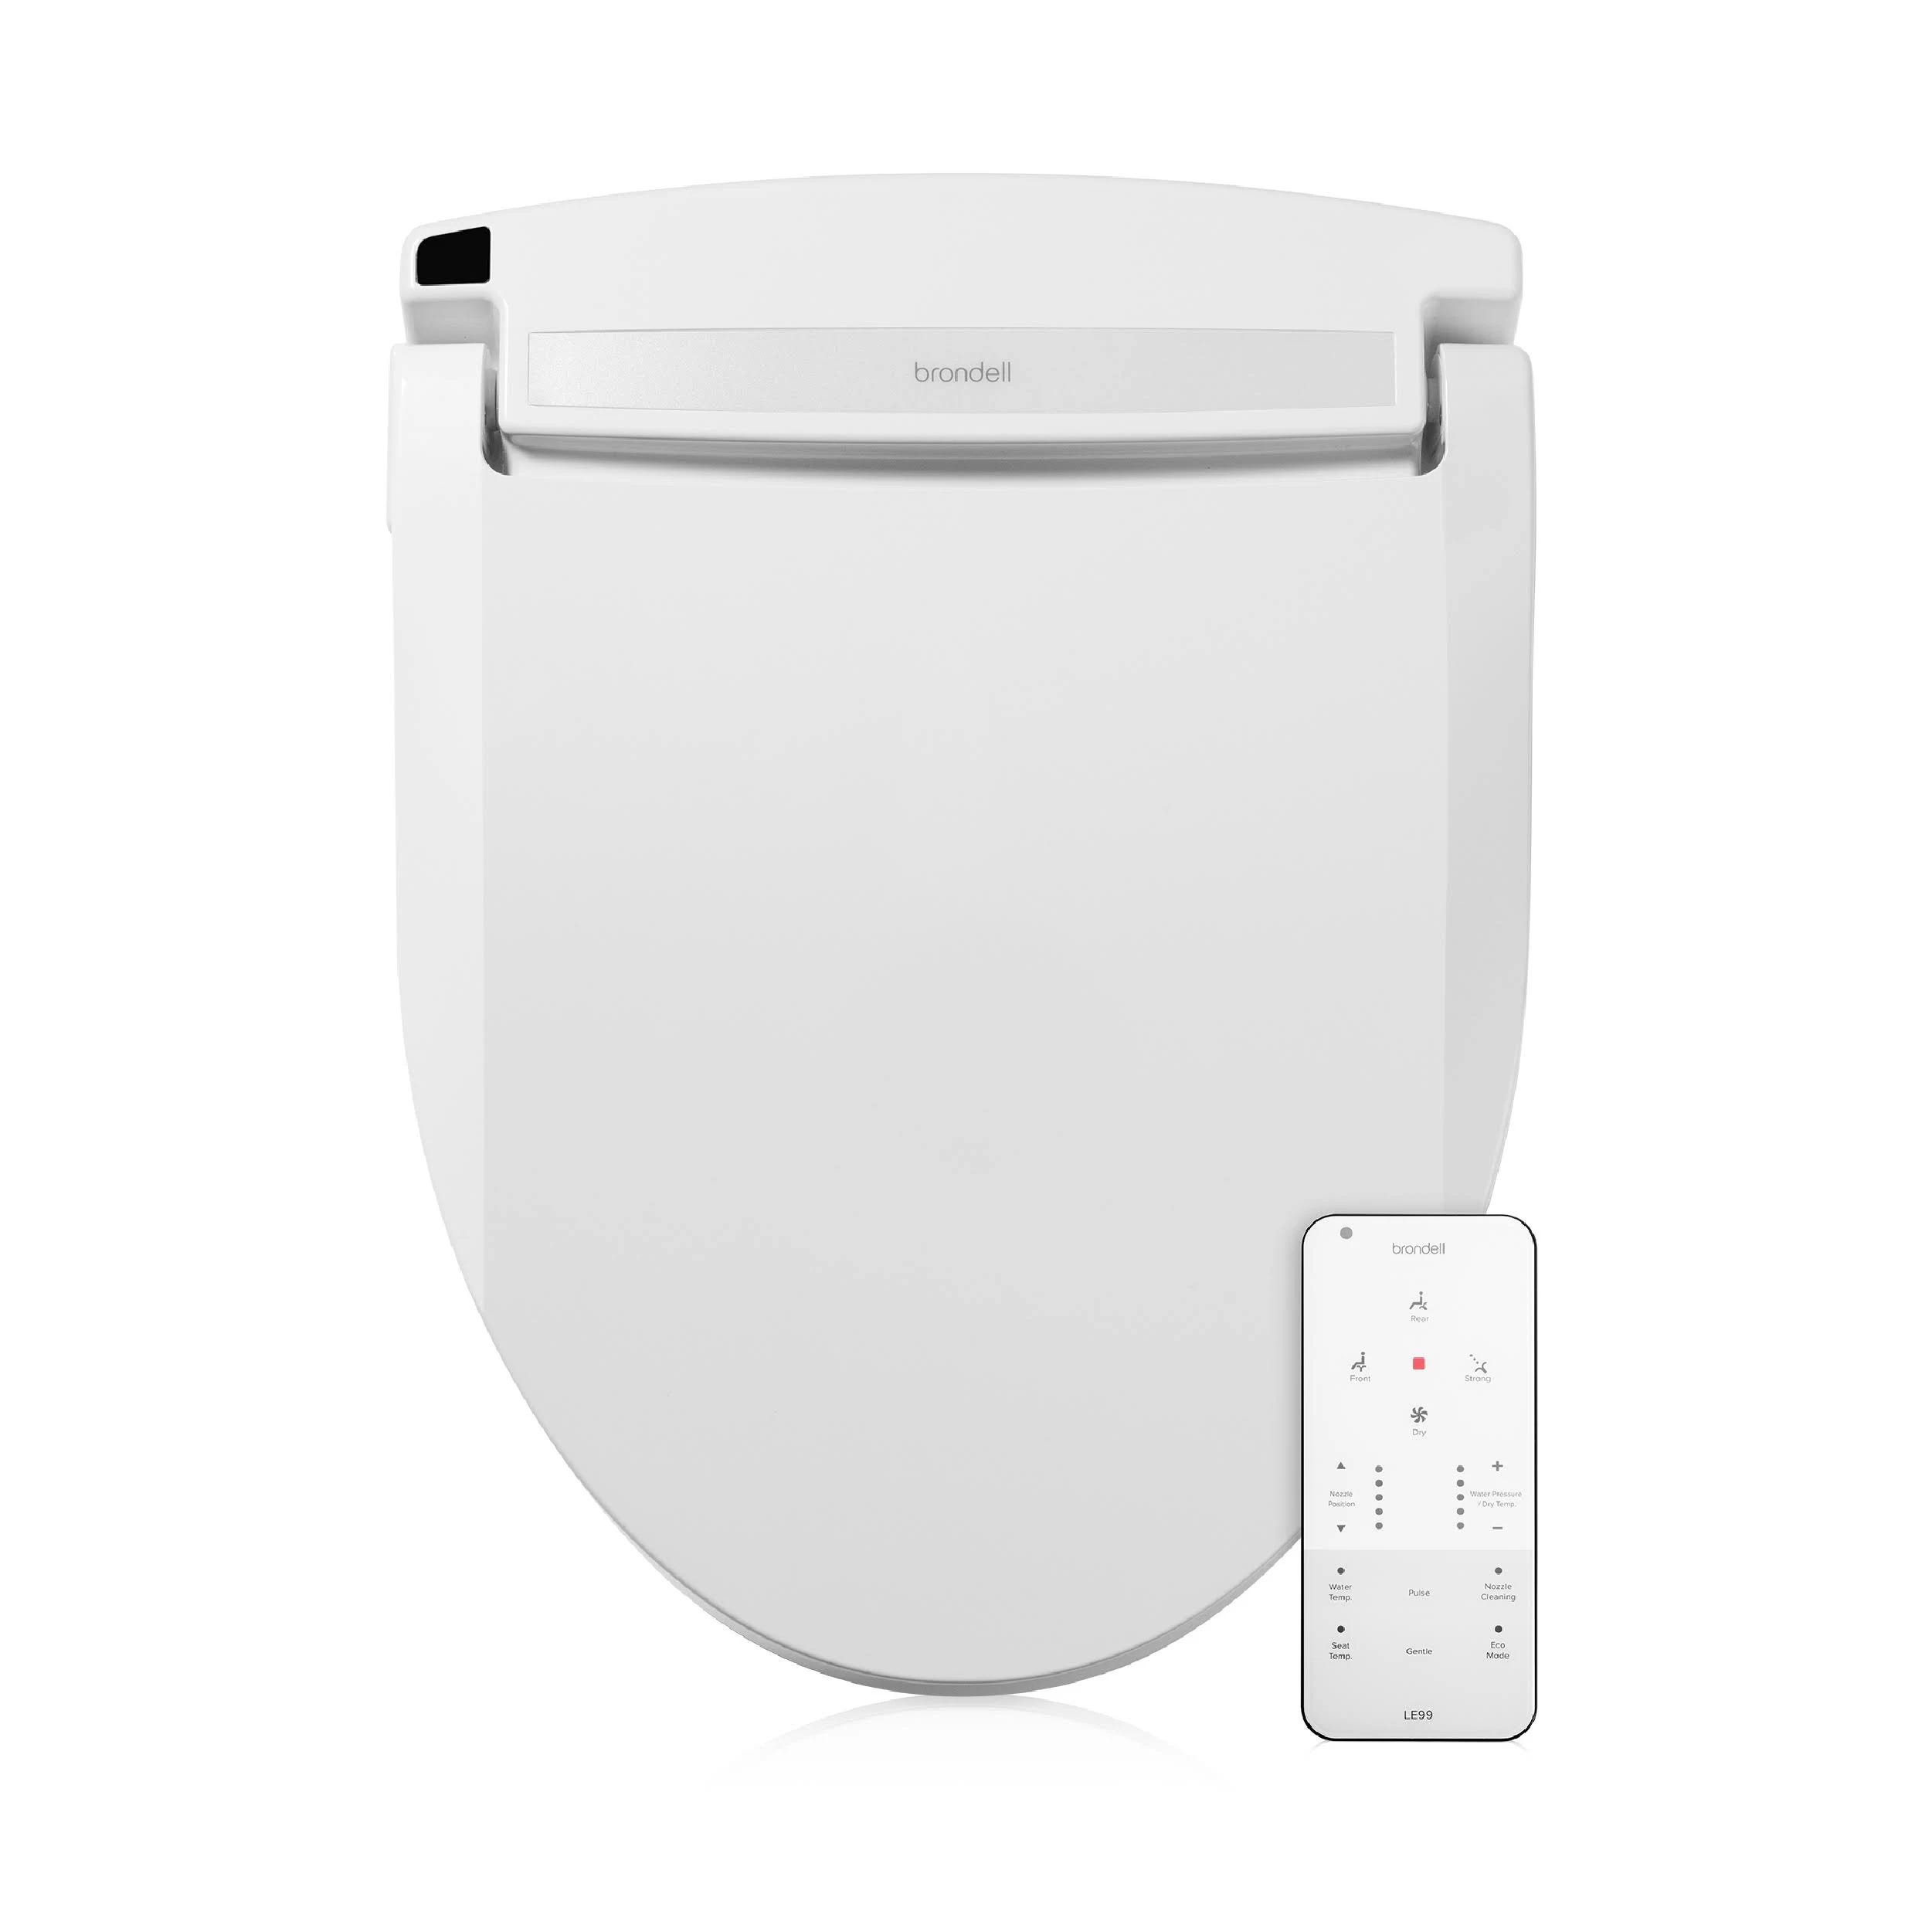 Upgrade Your Bathroom with the Swash LE99 Bidet Toilet Seat - Warm Air and Water Wash | Image